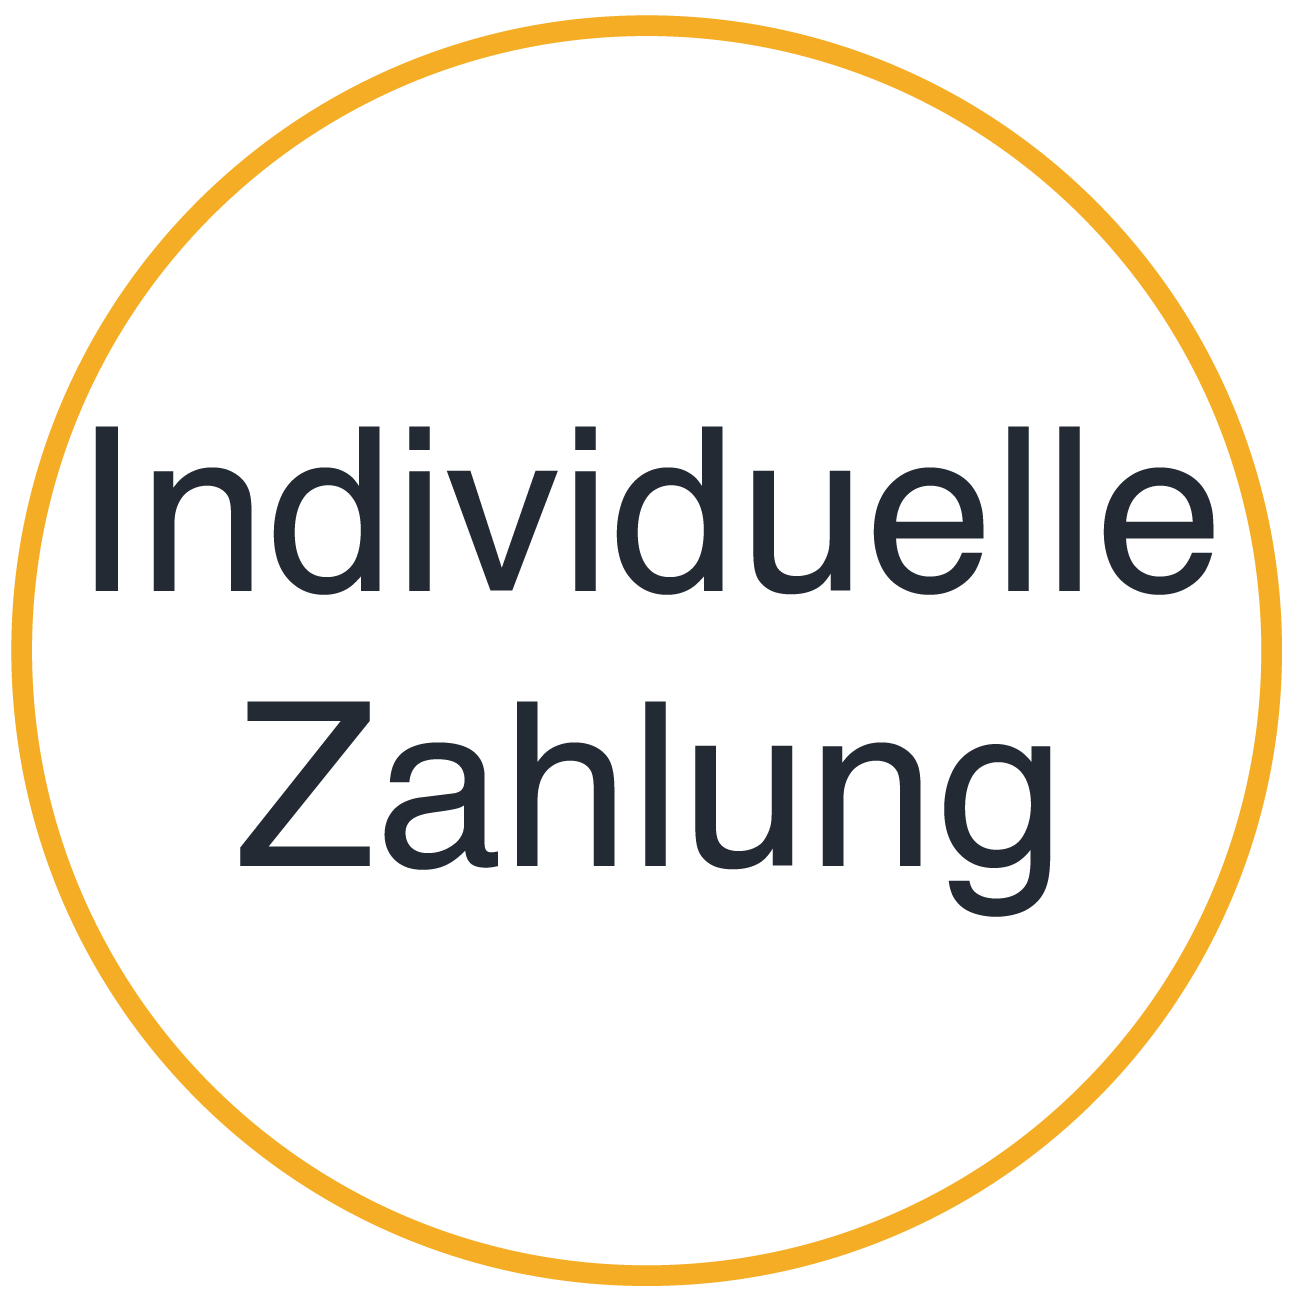 Individuelle Zahlung